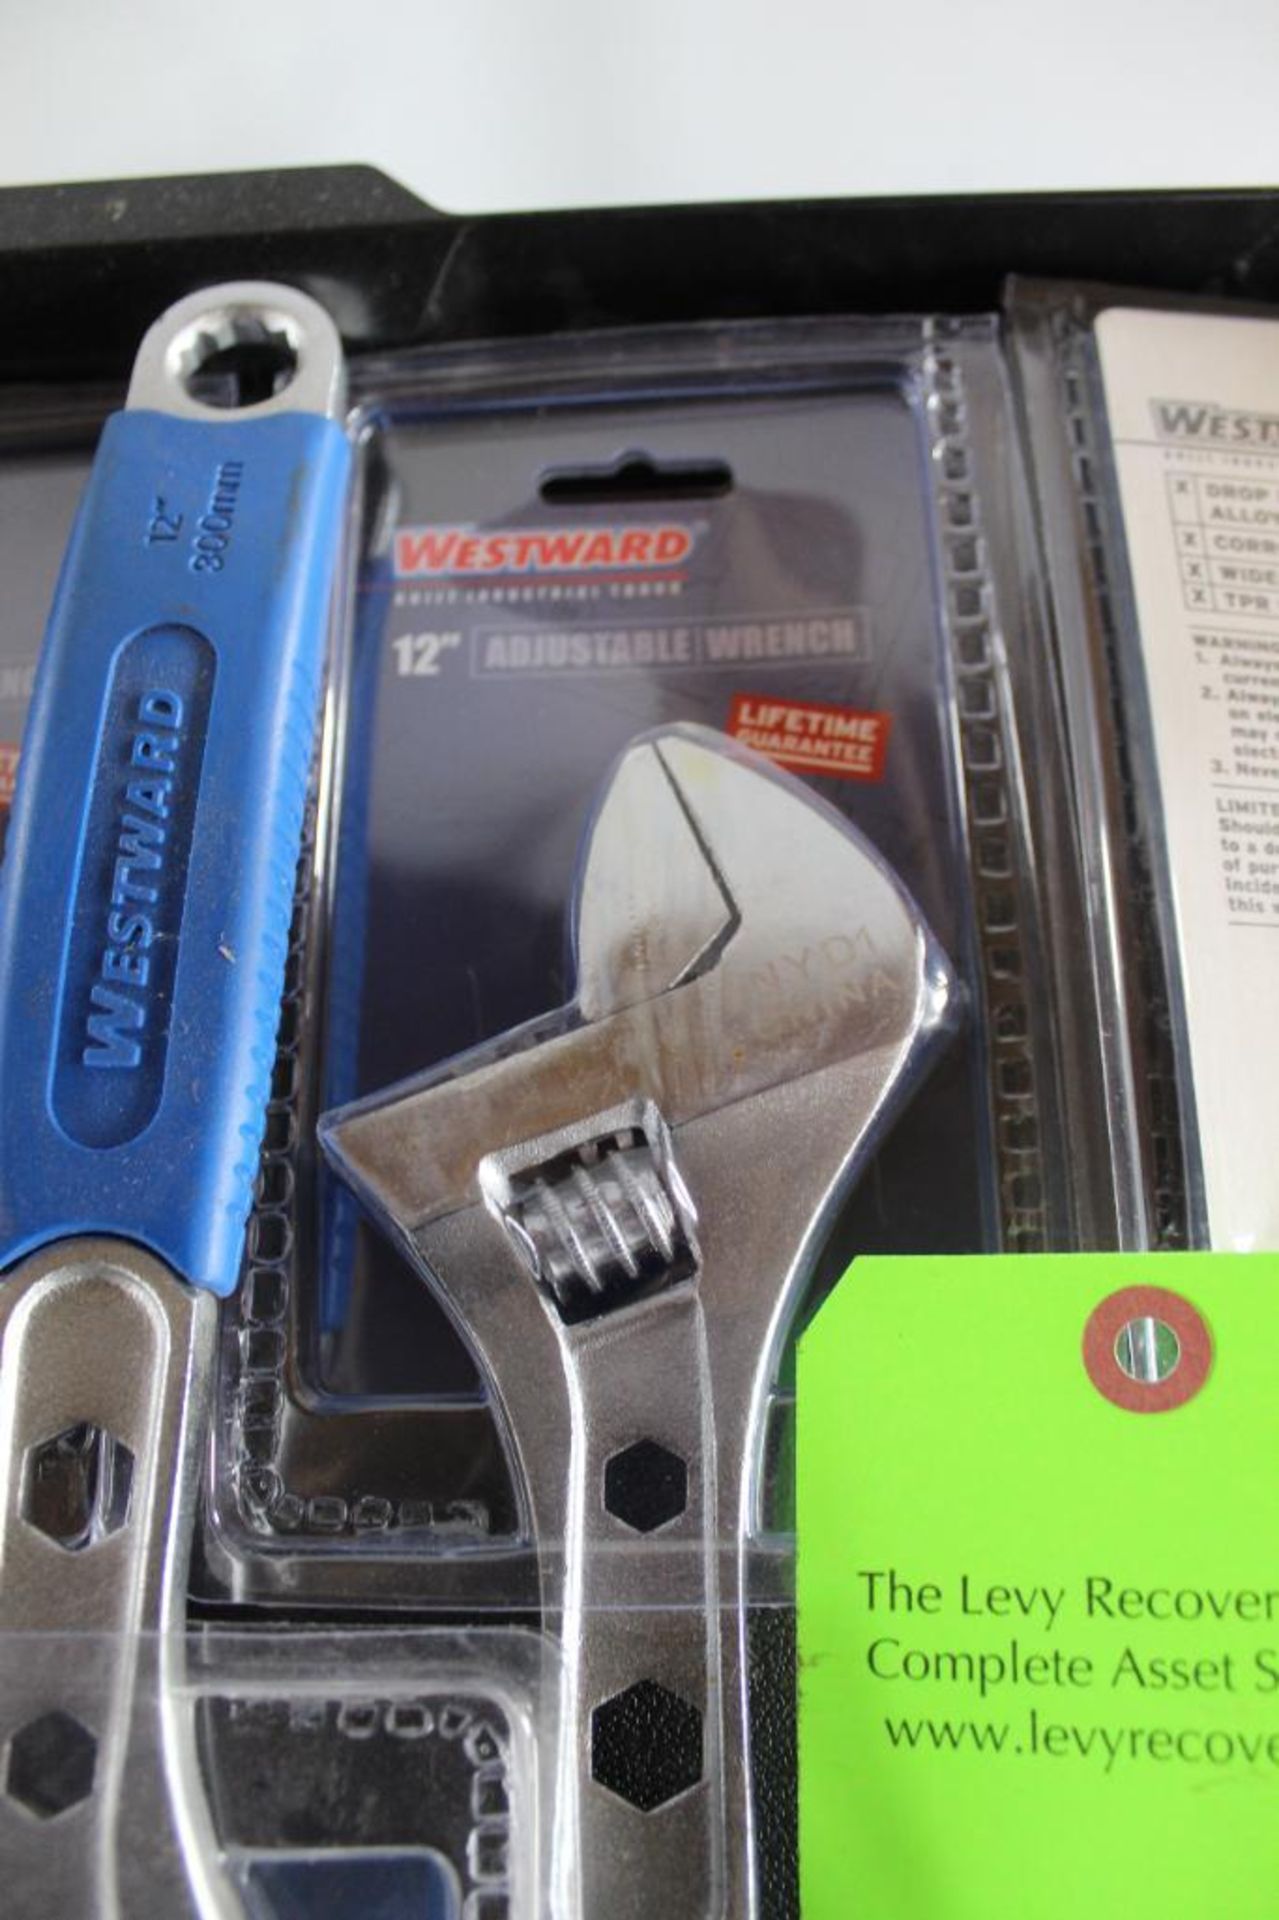 Lot of (8) Westward 12" Adjustable Wrench - Image 3 of 4